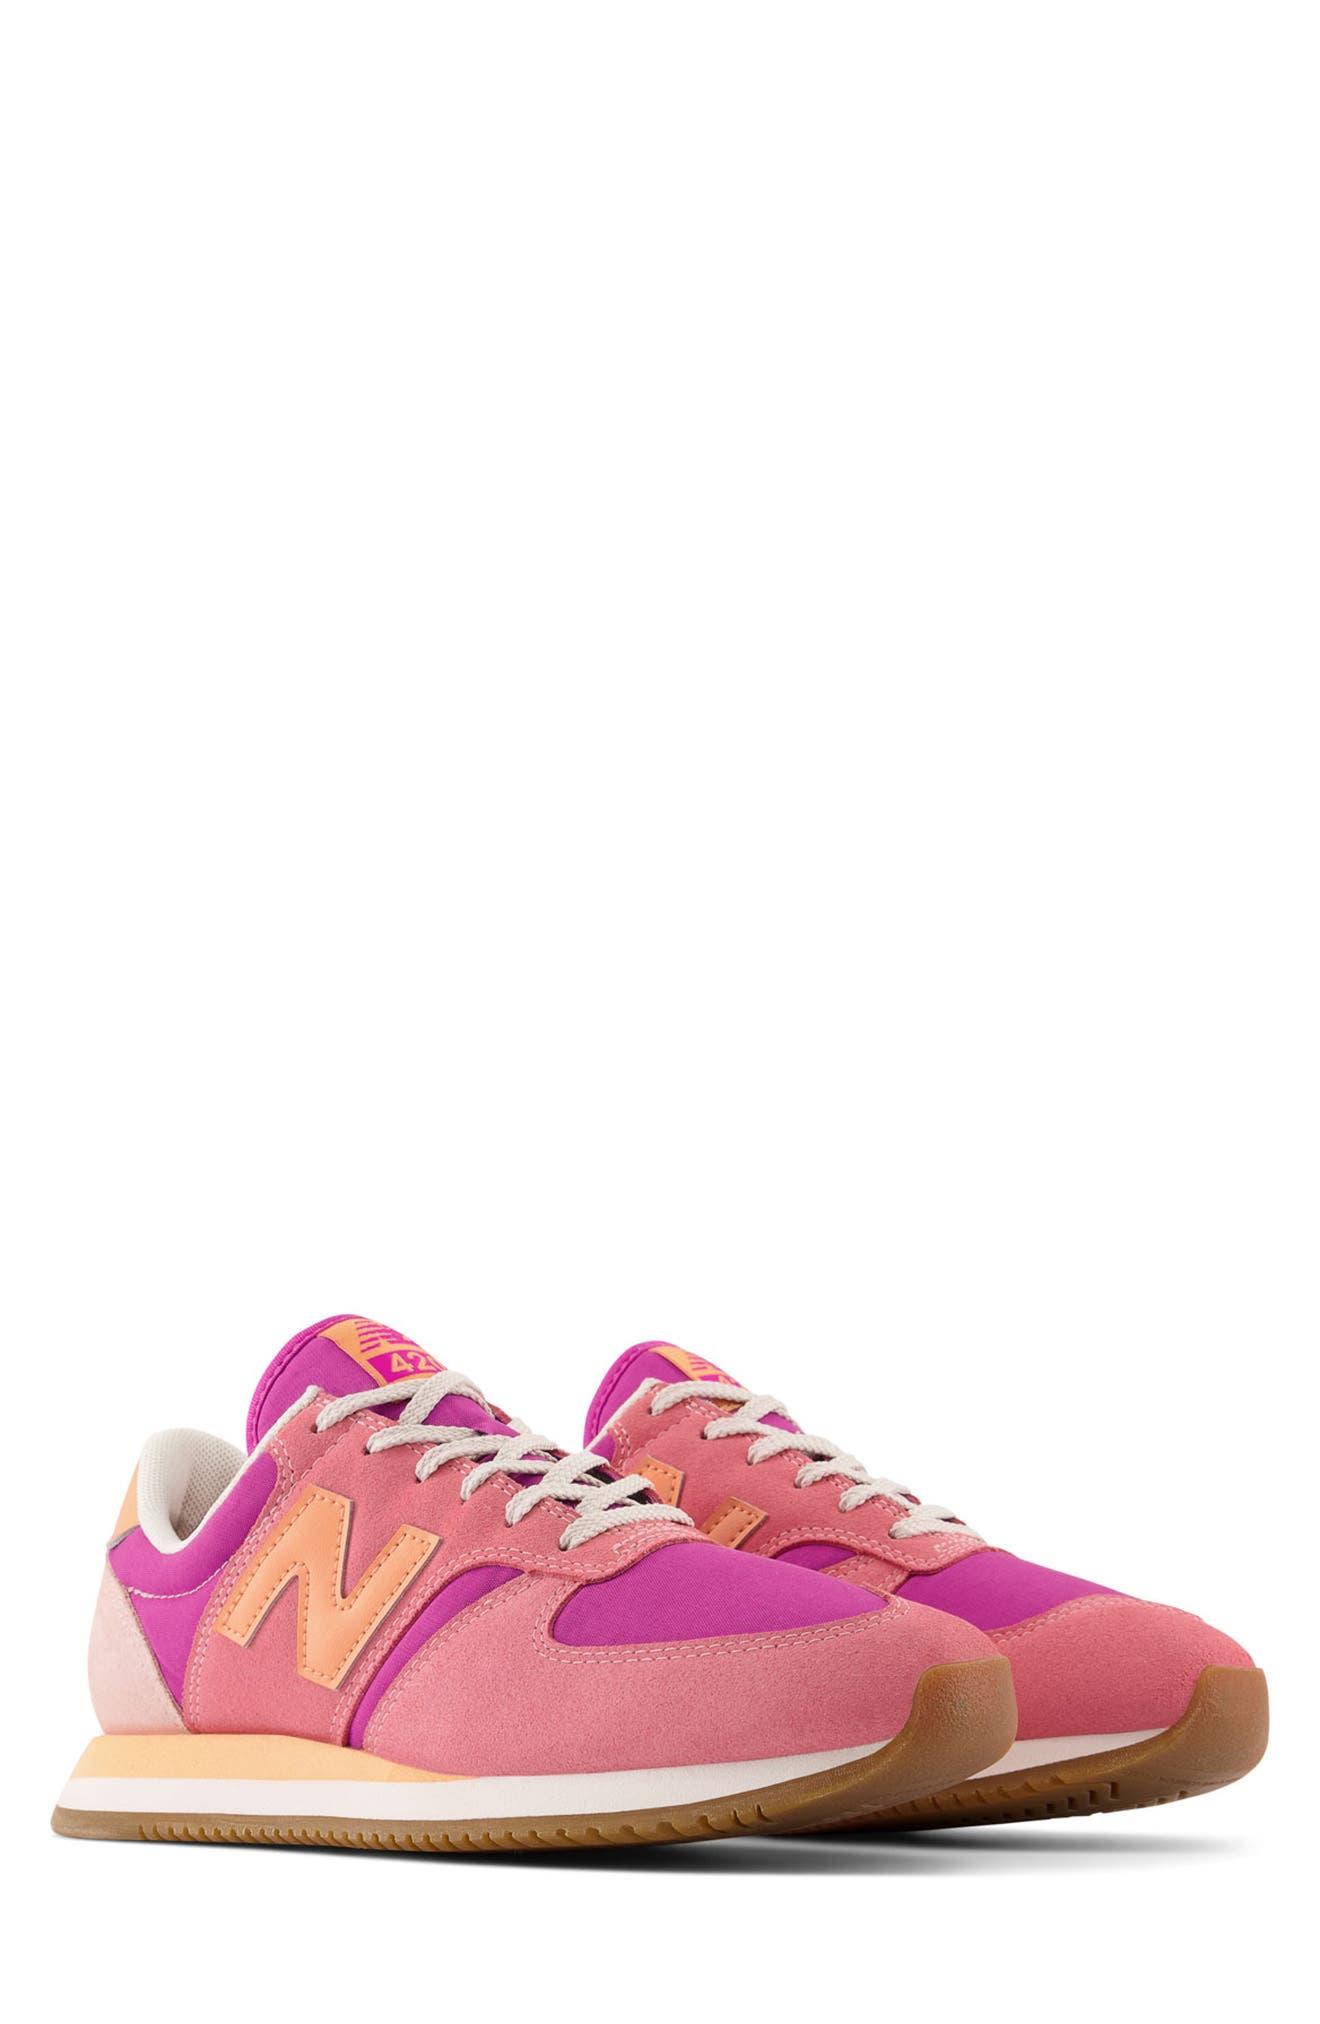 New Balance 420 Colorblock Sneaker in Pink | Lyst